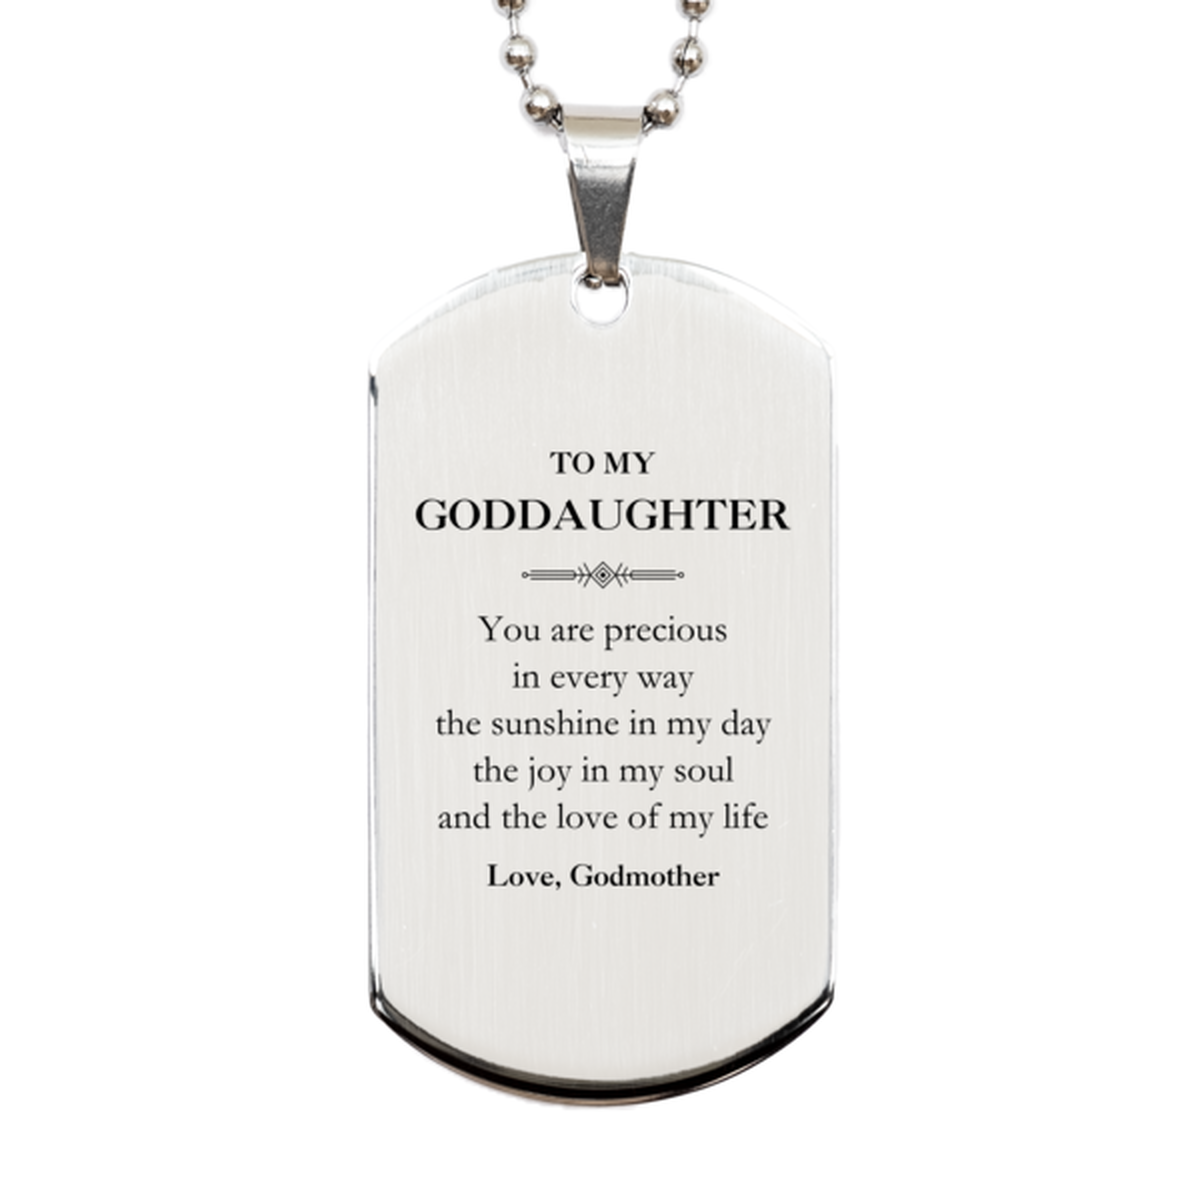 Graduation Gifts for Goddaughter Silver Dog Tag Present from Godmother, Christmas Goddaughter Birthday Gifts Goddaughter You are precious in every way the sunshine in my day. Love, Godmother